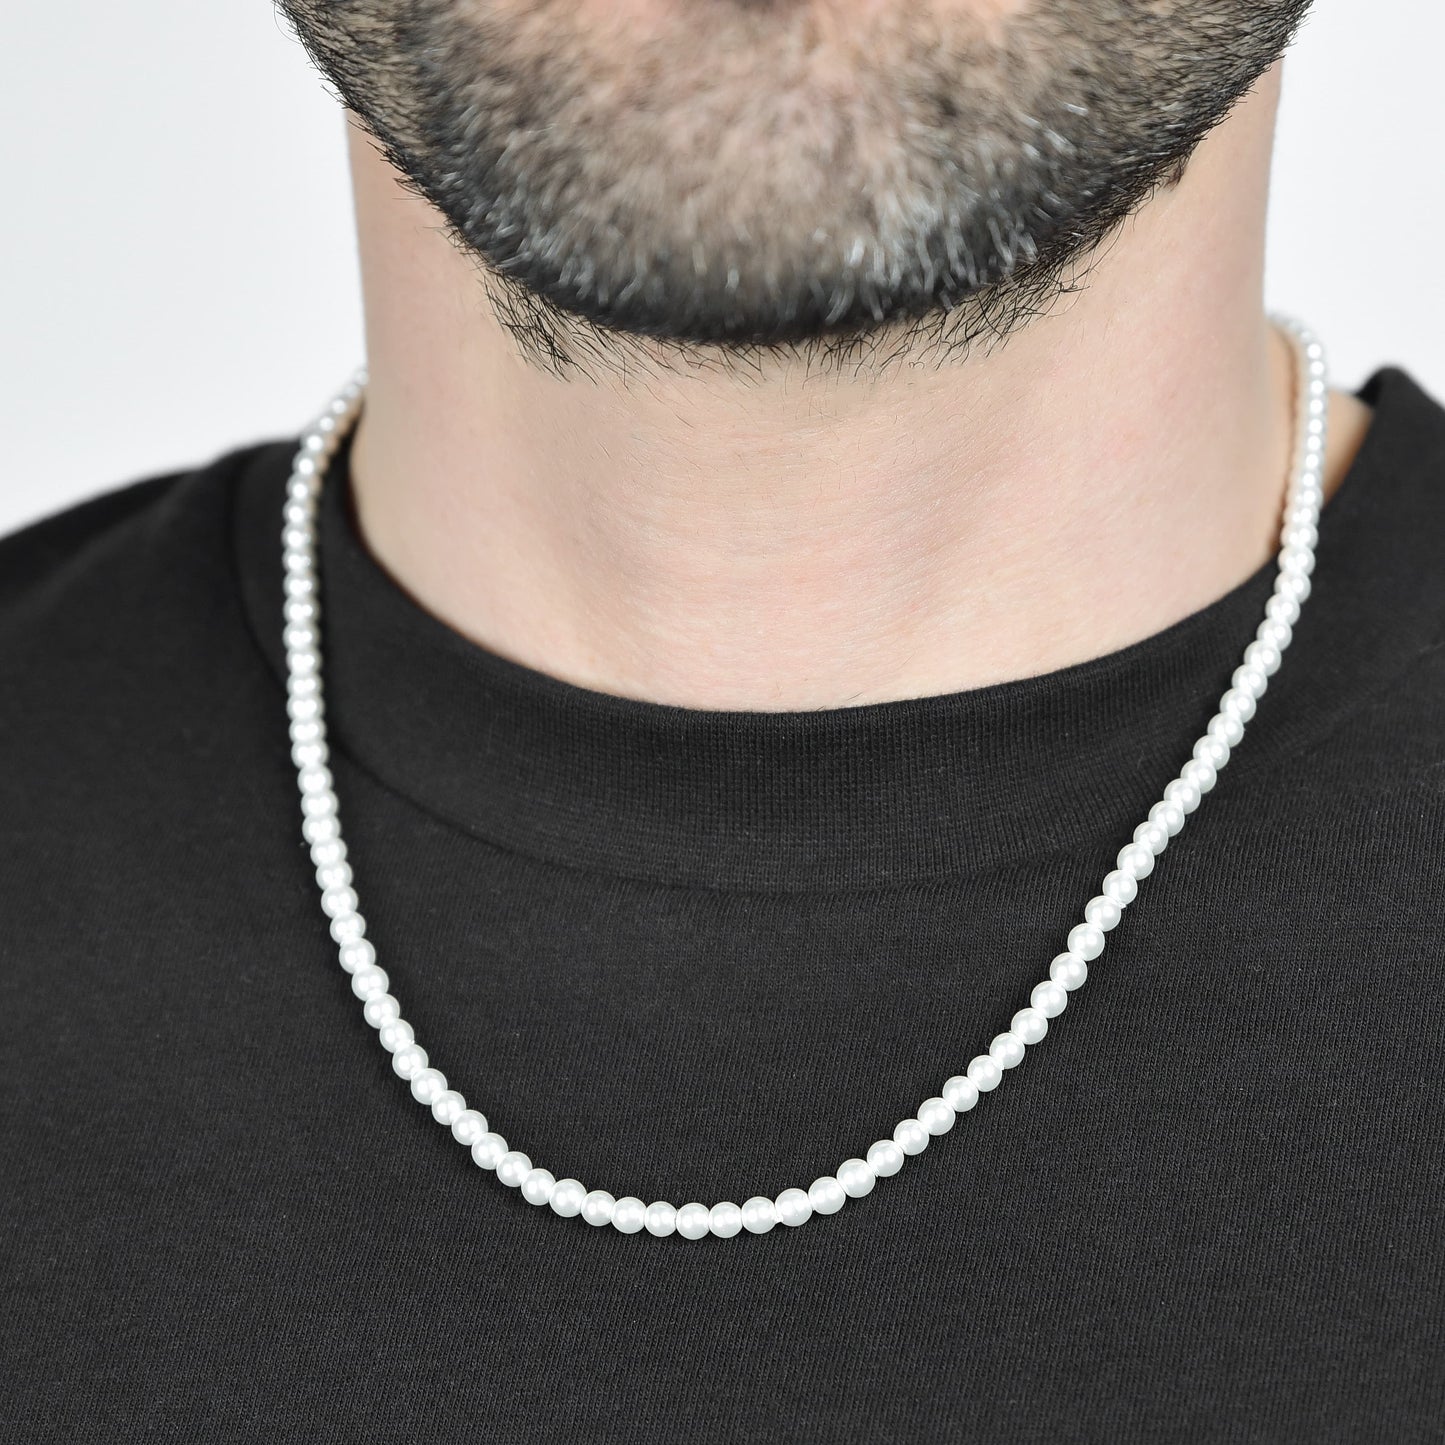 STEEL MEN'S NECKLACE WITH WHITE PEARLS